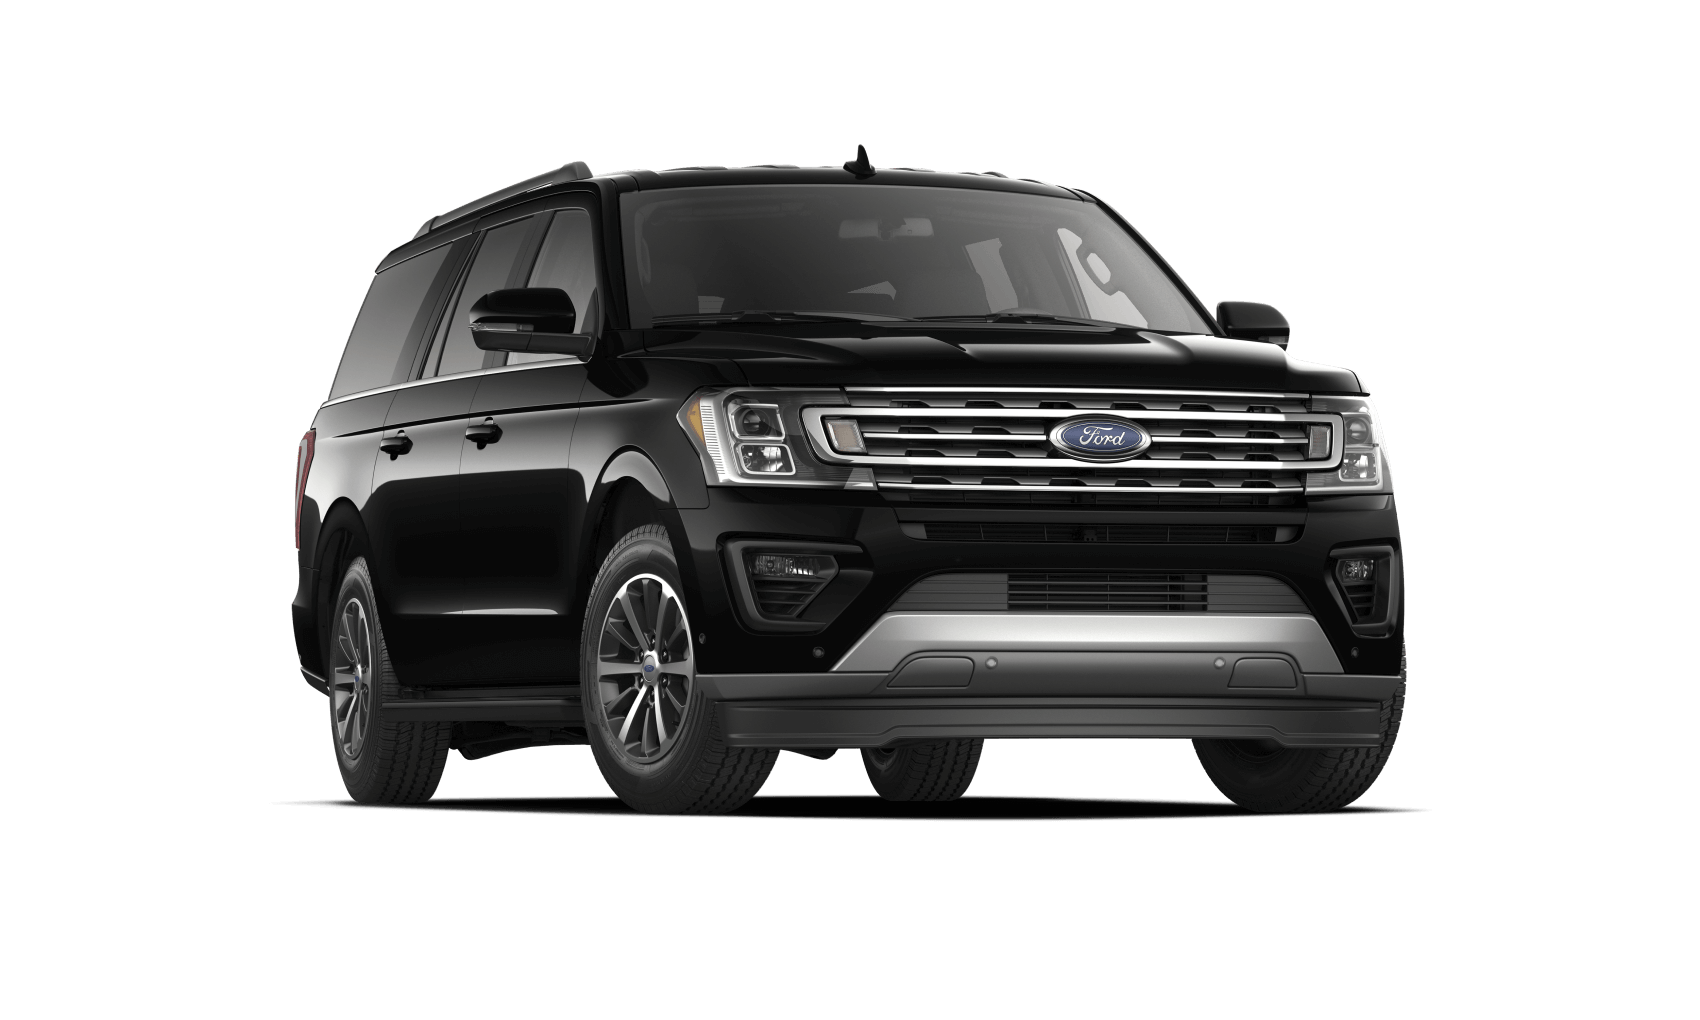 Ford Expedition XLT MAX